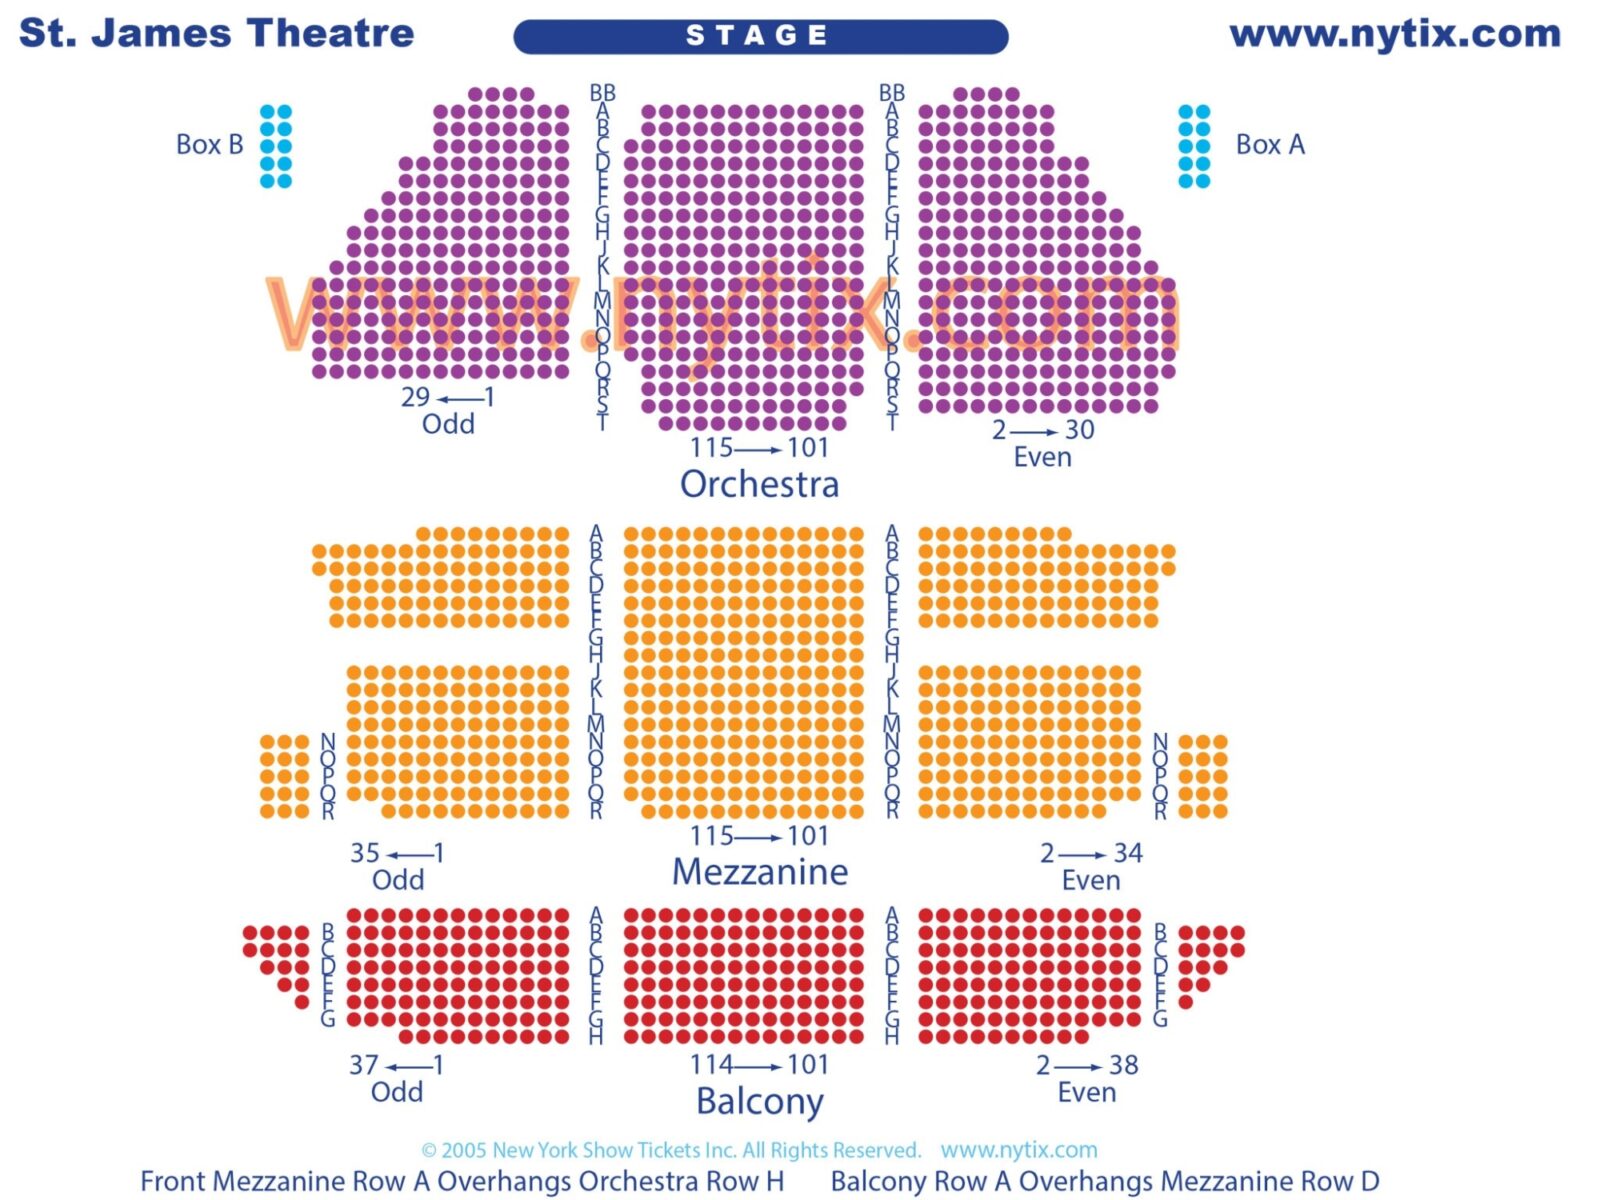 https://dxan6czxprkid.cloudfront.net/theatre/seating-maps/_x1600/st_james_seating-new-2018-final-2048x1536.jpg